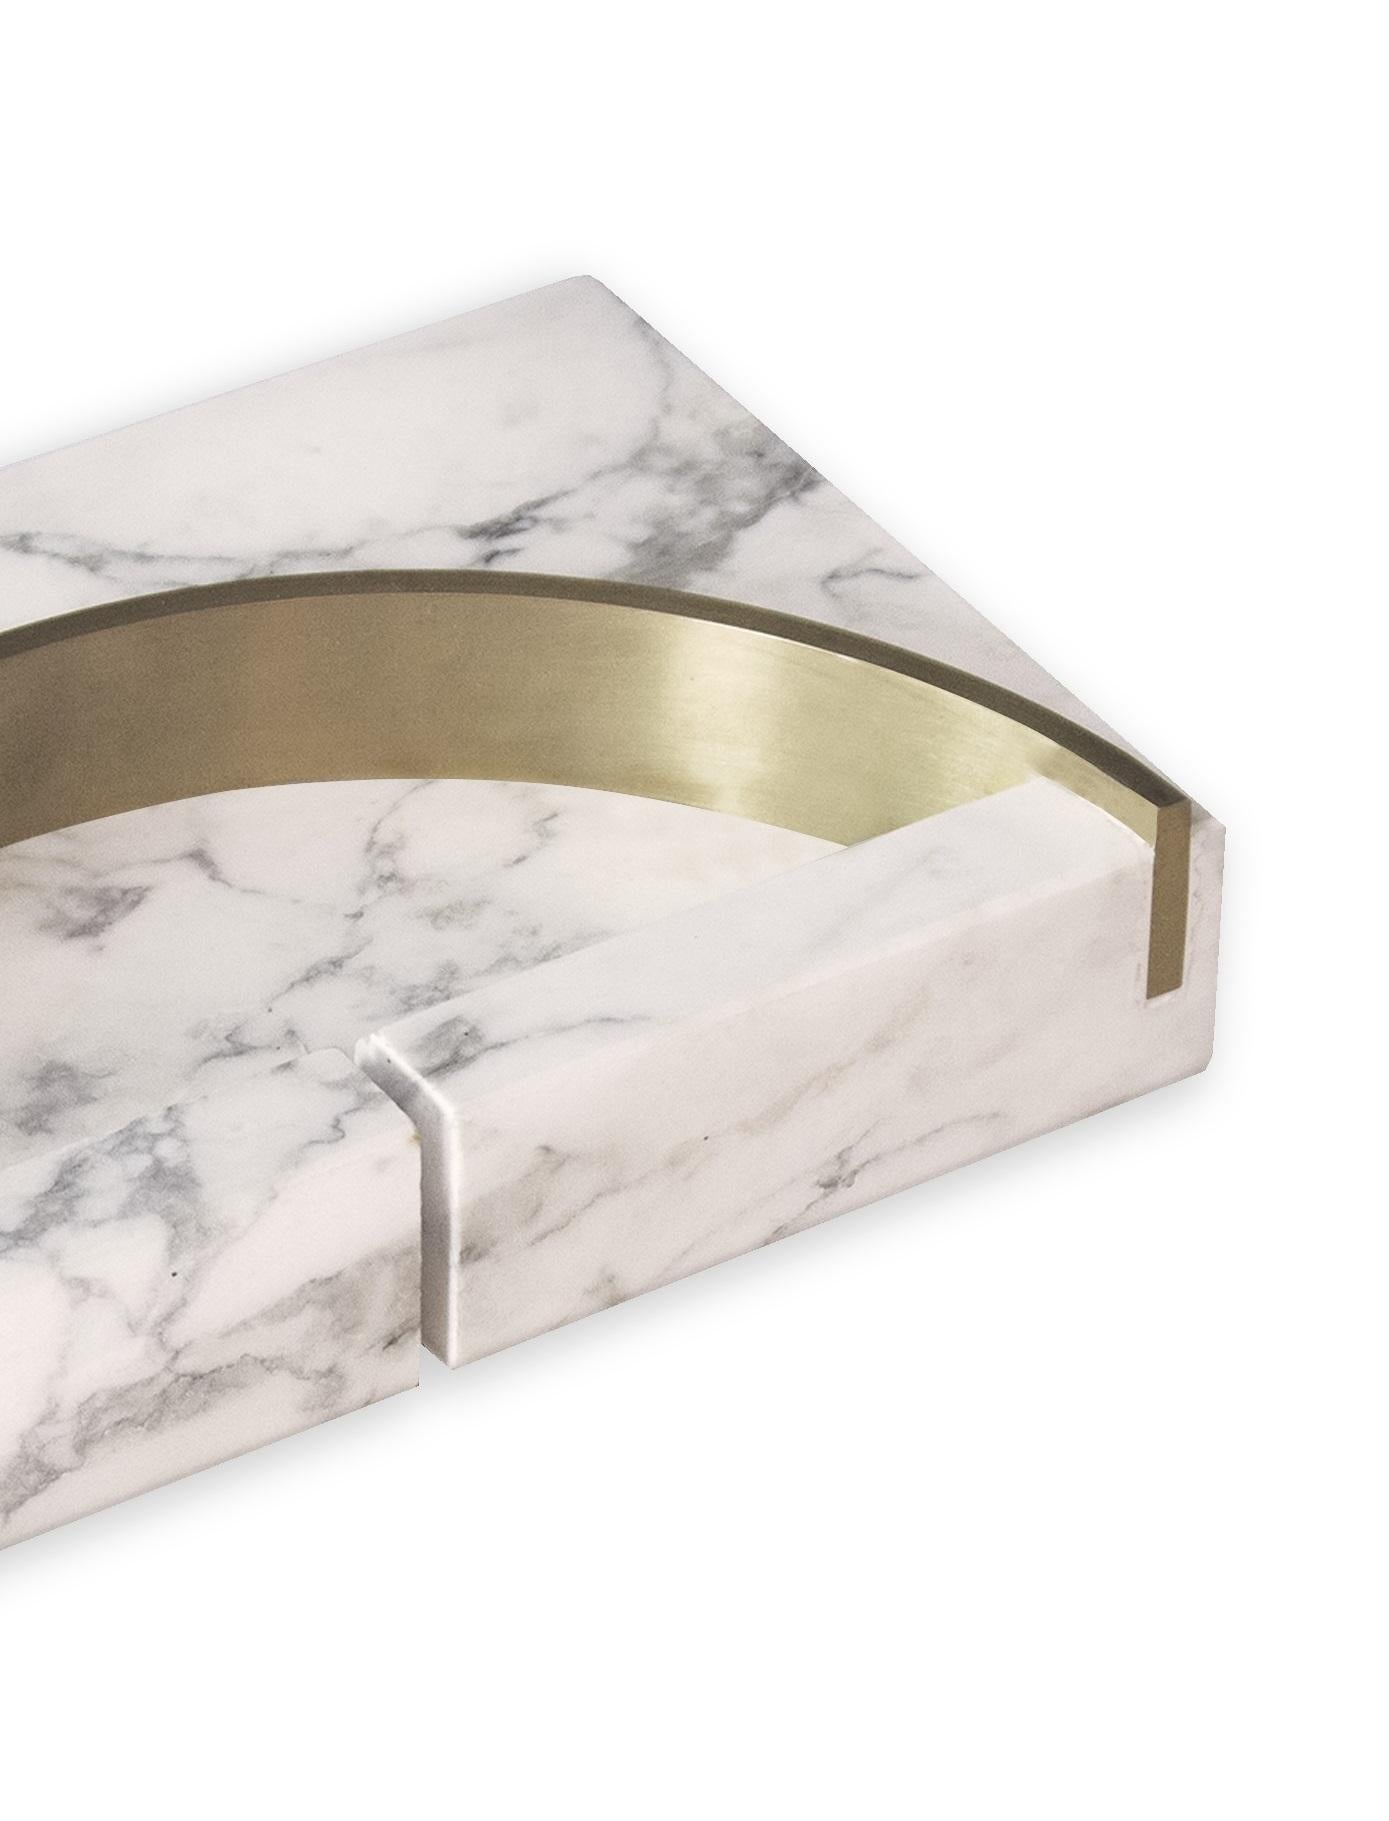 Aureo Ashtray by Andrea Bonini
Limited Edition
Dimensions: D 13 x W 20 x H 4 cm.
Materials: Carrara marble and brass.

Made in Italy. Limited series, numbered and signed pieces. Custom size or finish on request. Also available in different marble